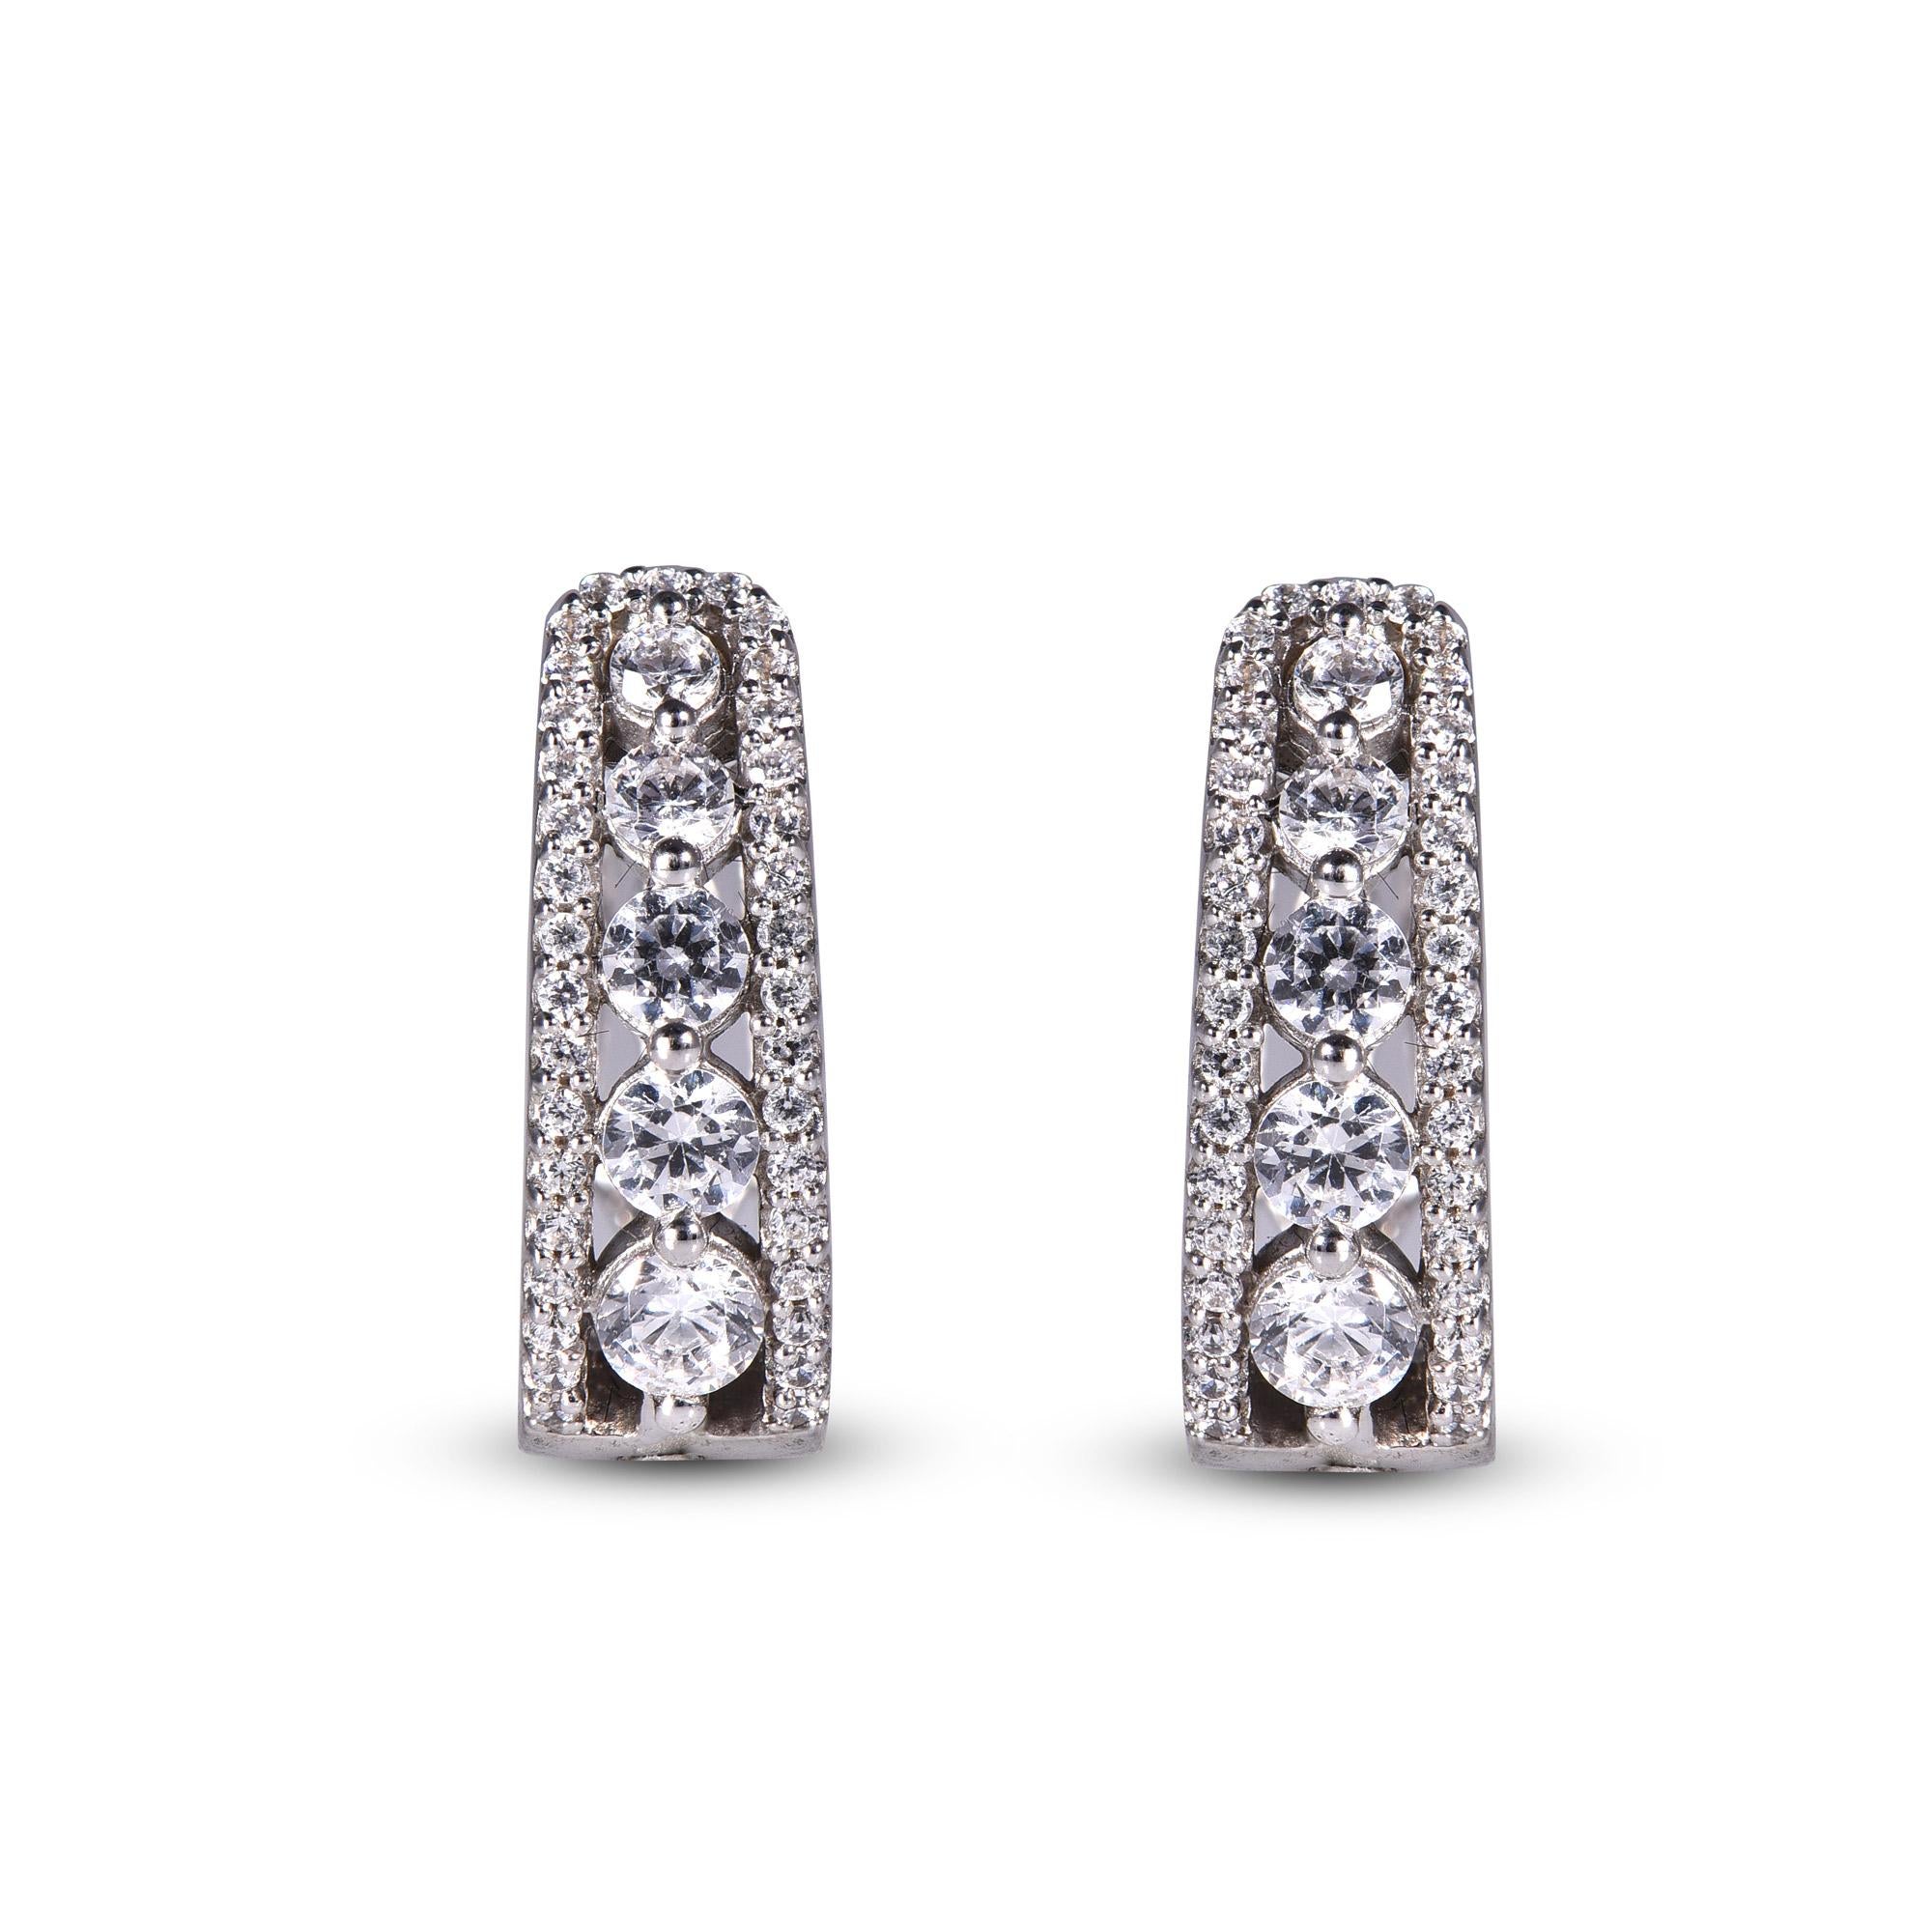 These exquisite diamond hoop earrings offer beauty equaled only to her own. These earrings crafted in 14 karat in white gold and feature clusters of 80 round brilliant dazzling diamond set in prong setting. These timeless hoop earrings that secure